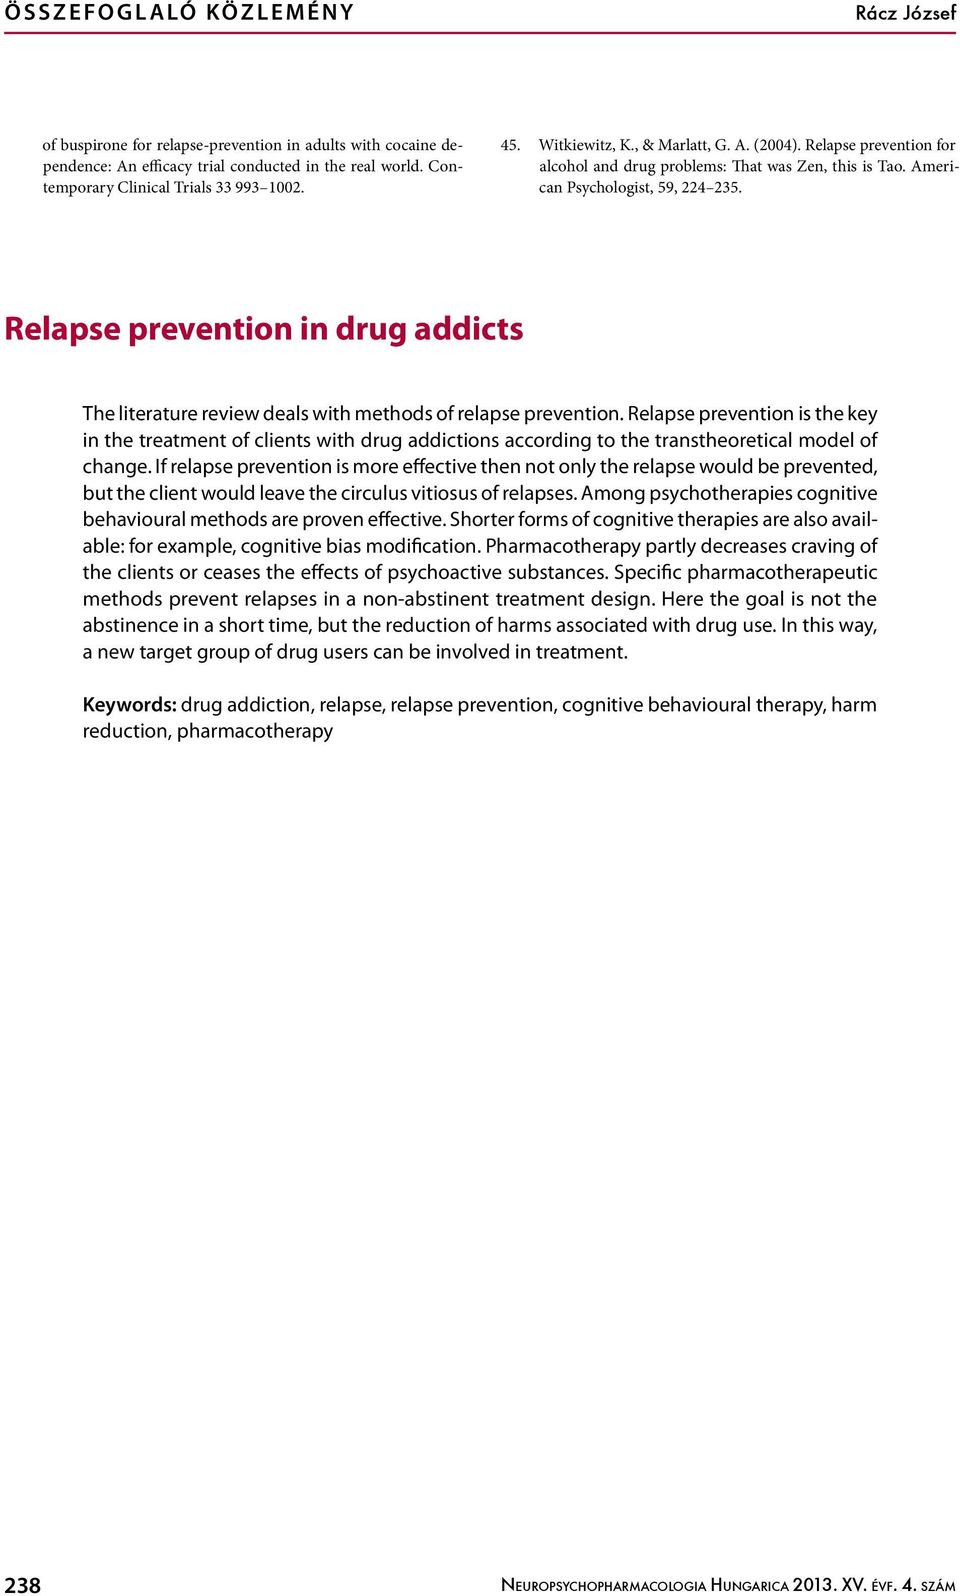 Relapse prevention in drug addicts The literature review deals with methods of relapse prevention.